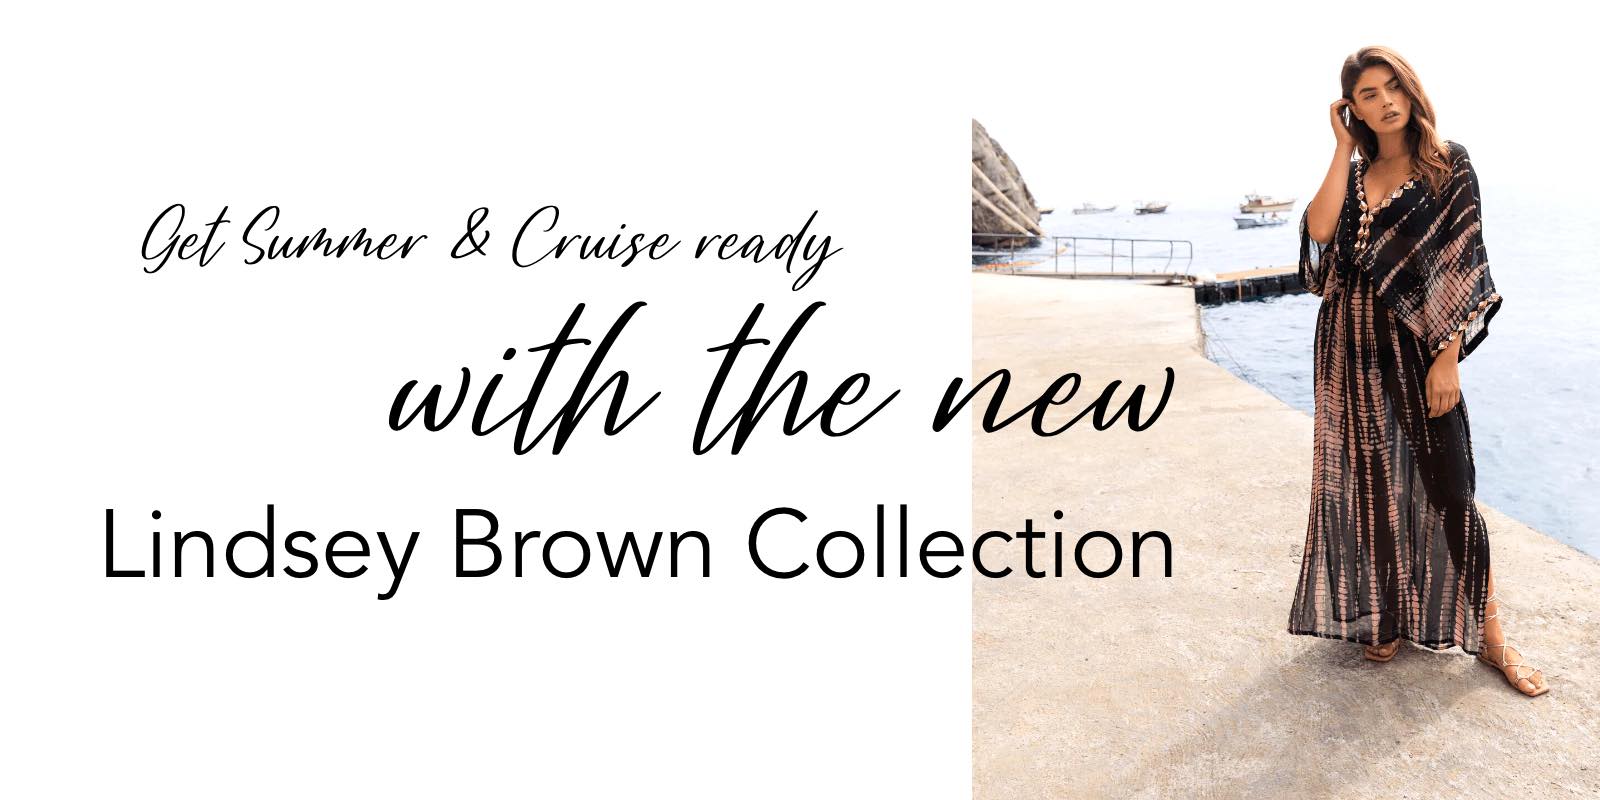 Discover the latest Lindsey Brown Resortwear at Izzi's